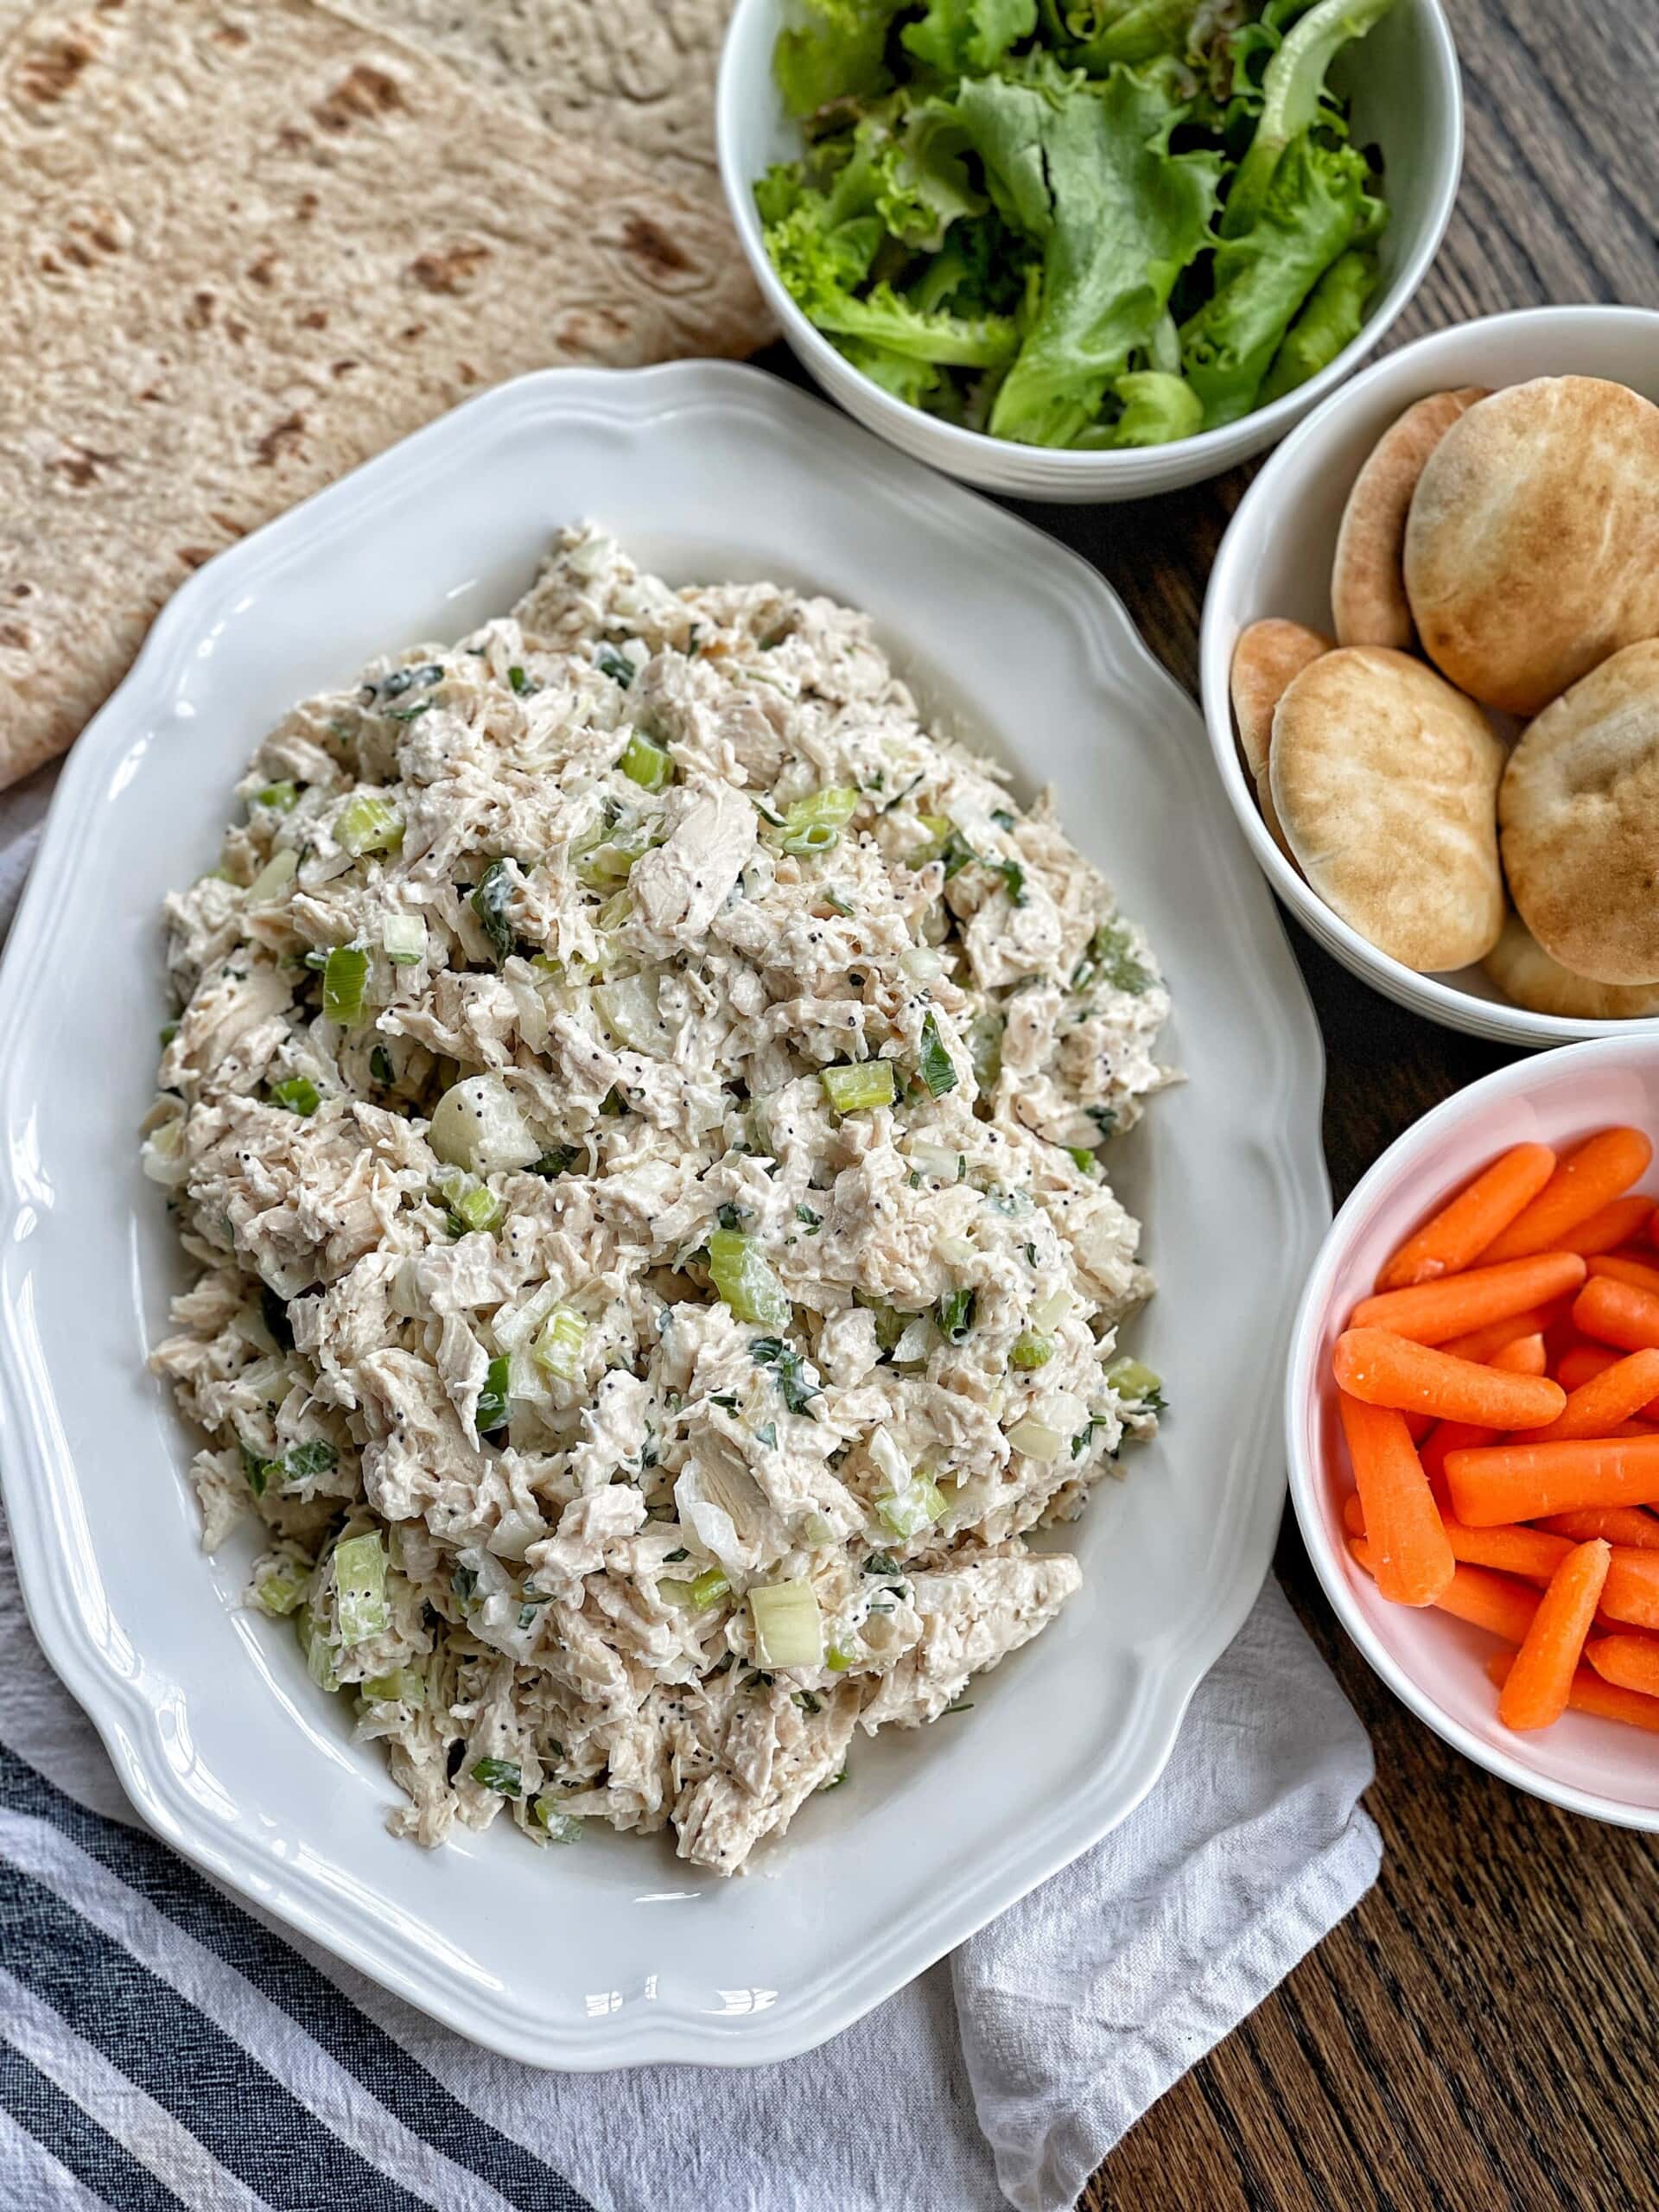 classic chicken salad with herbs